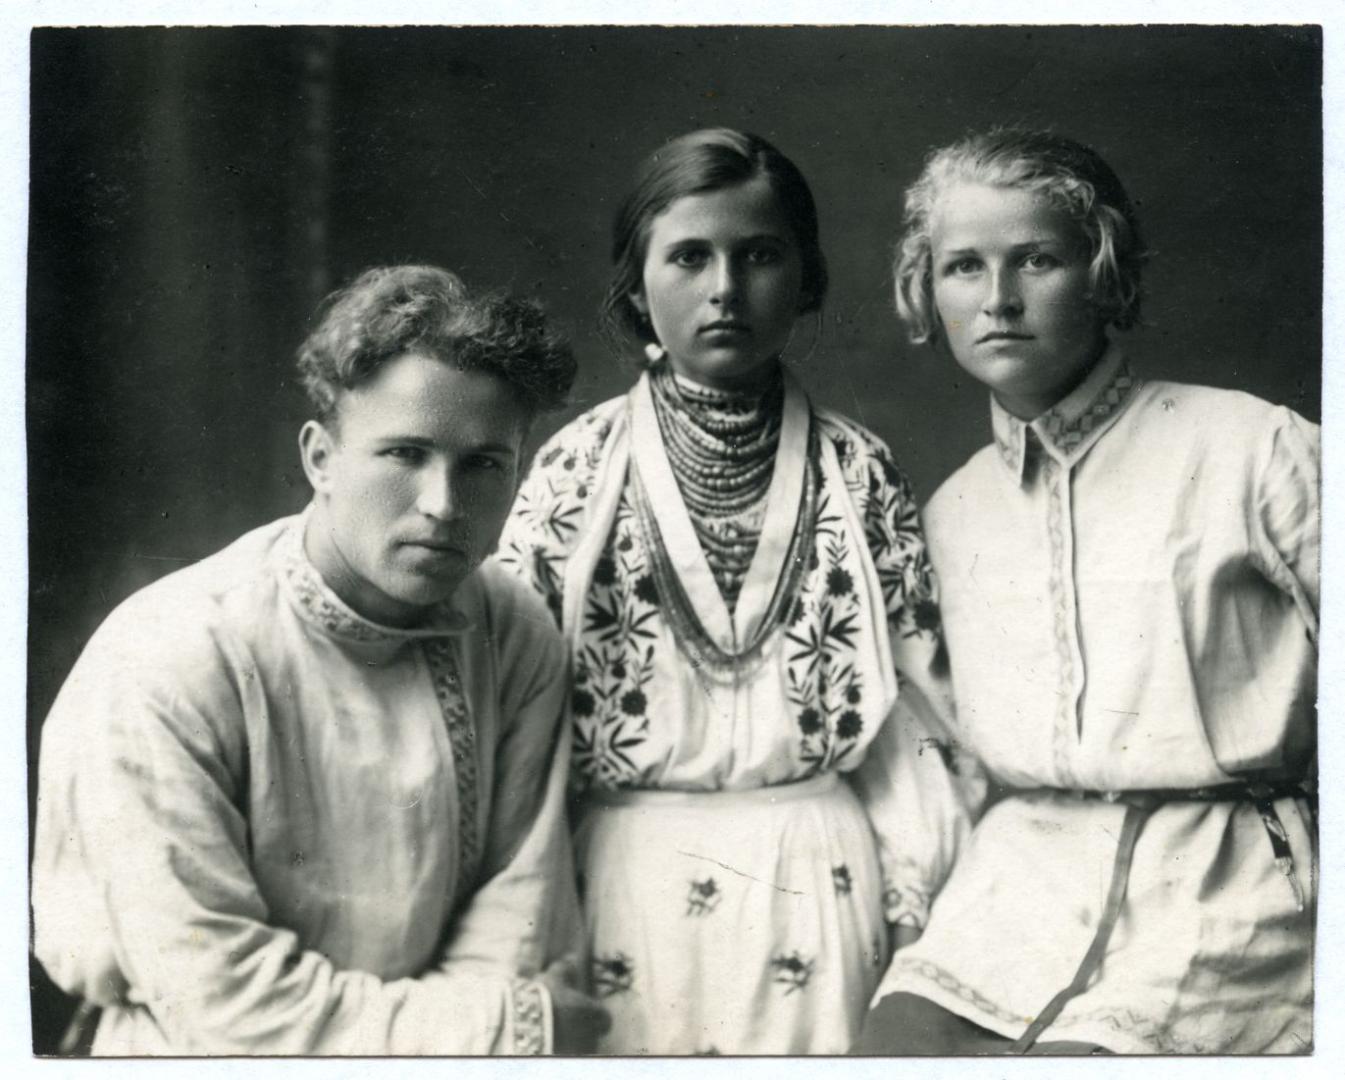 Photo. A young man and two girls wearing folk attire